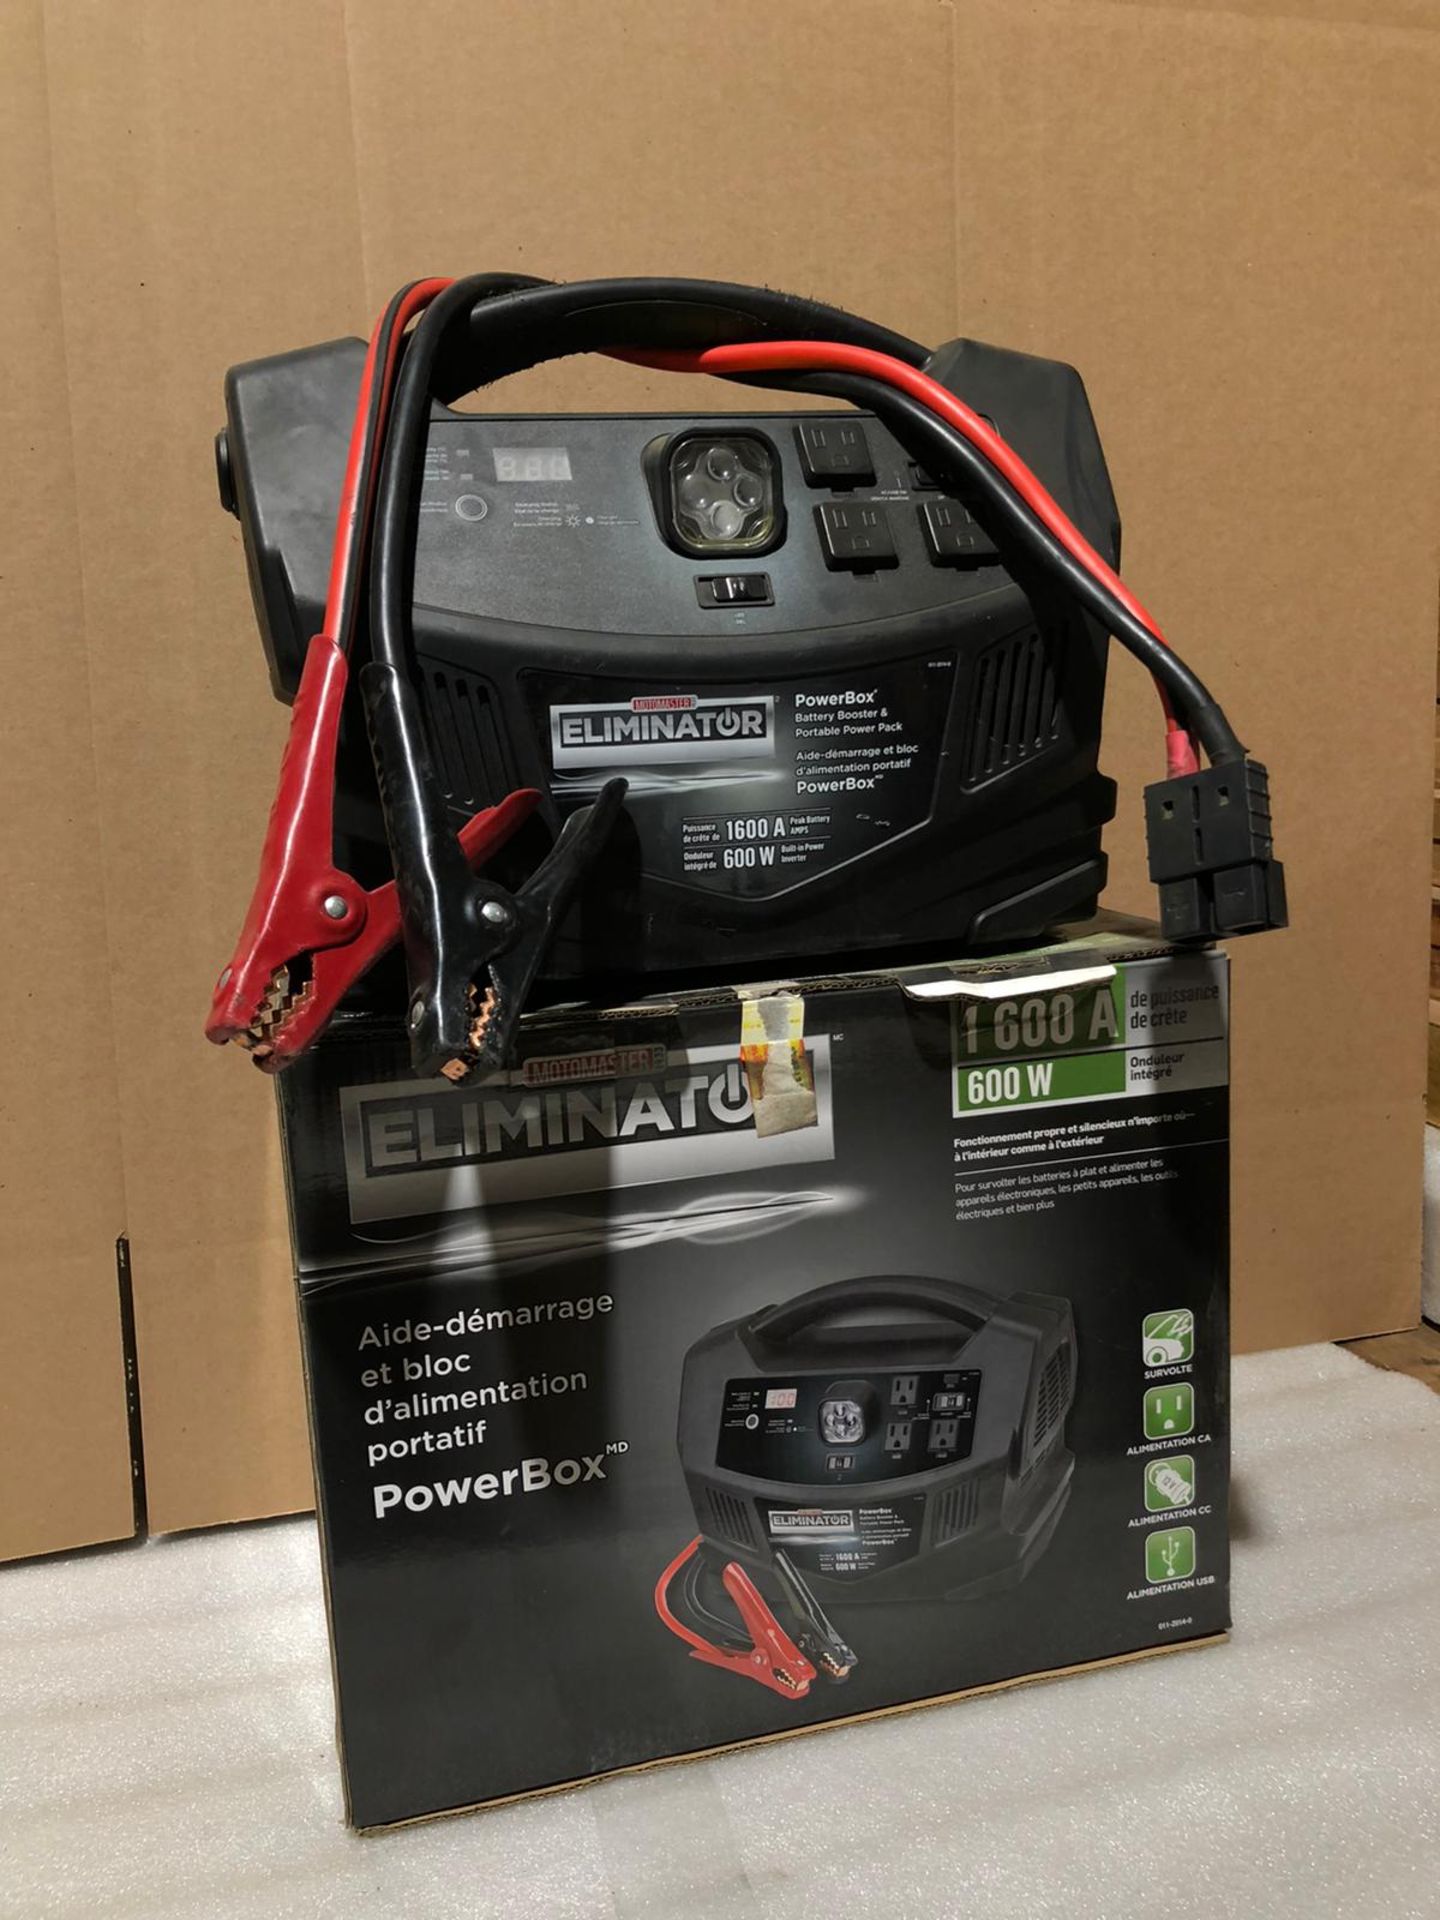 Eliminator Powerbox Battery Booster unit 1600A 600W portable power pack - Image 2 of 3